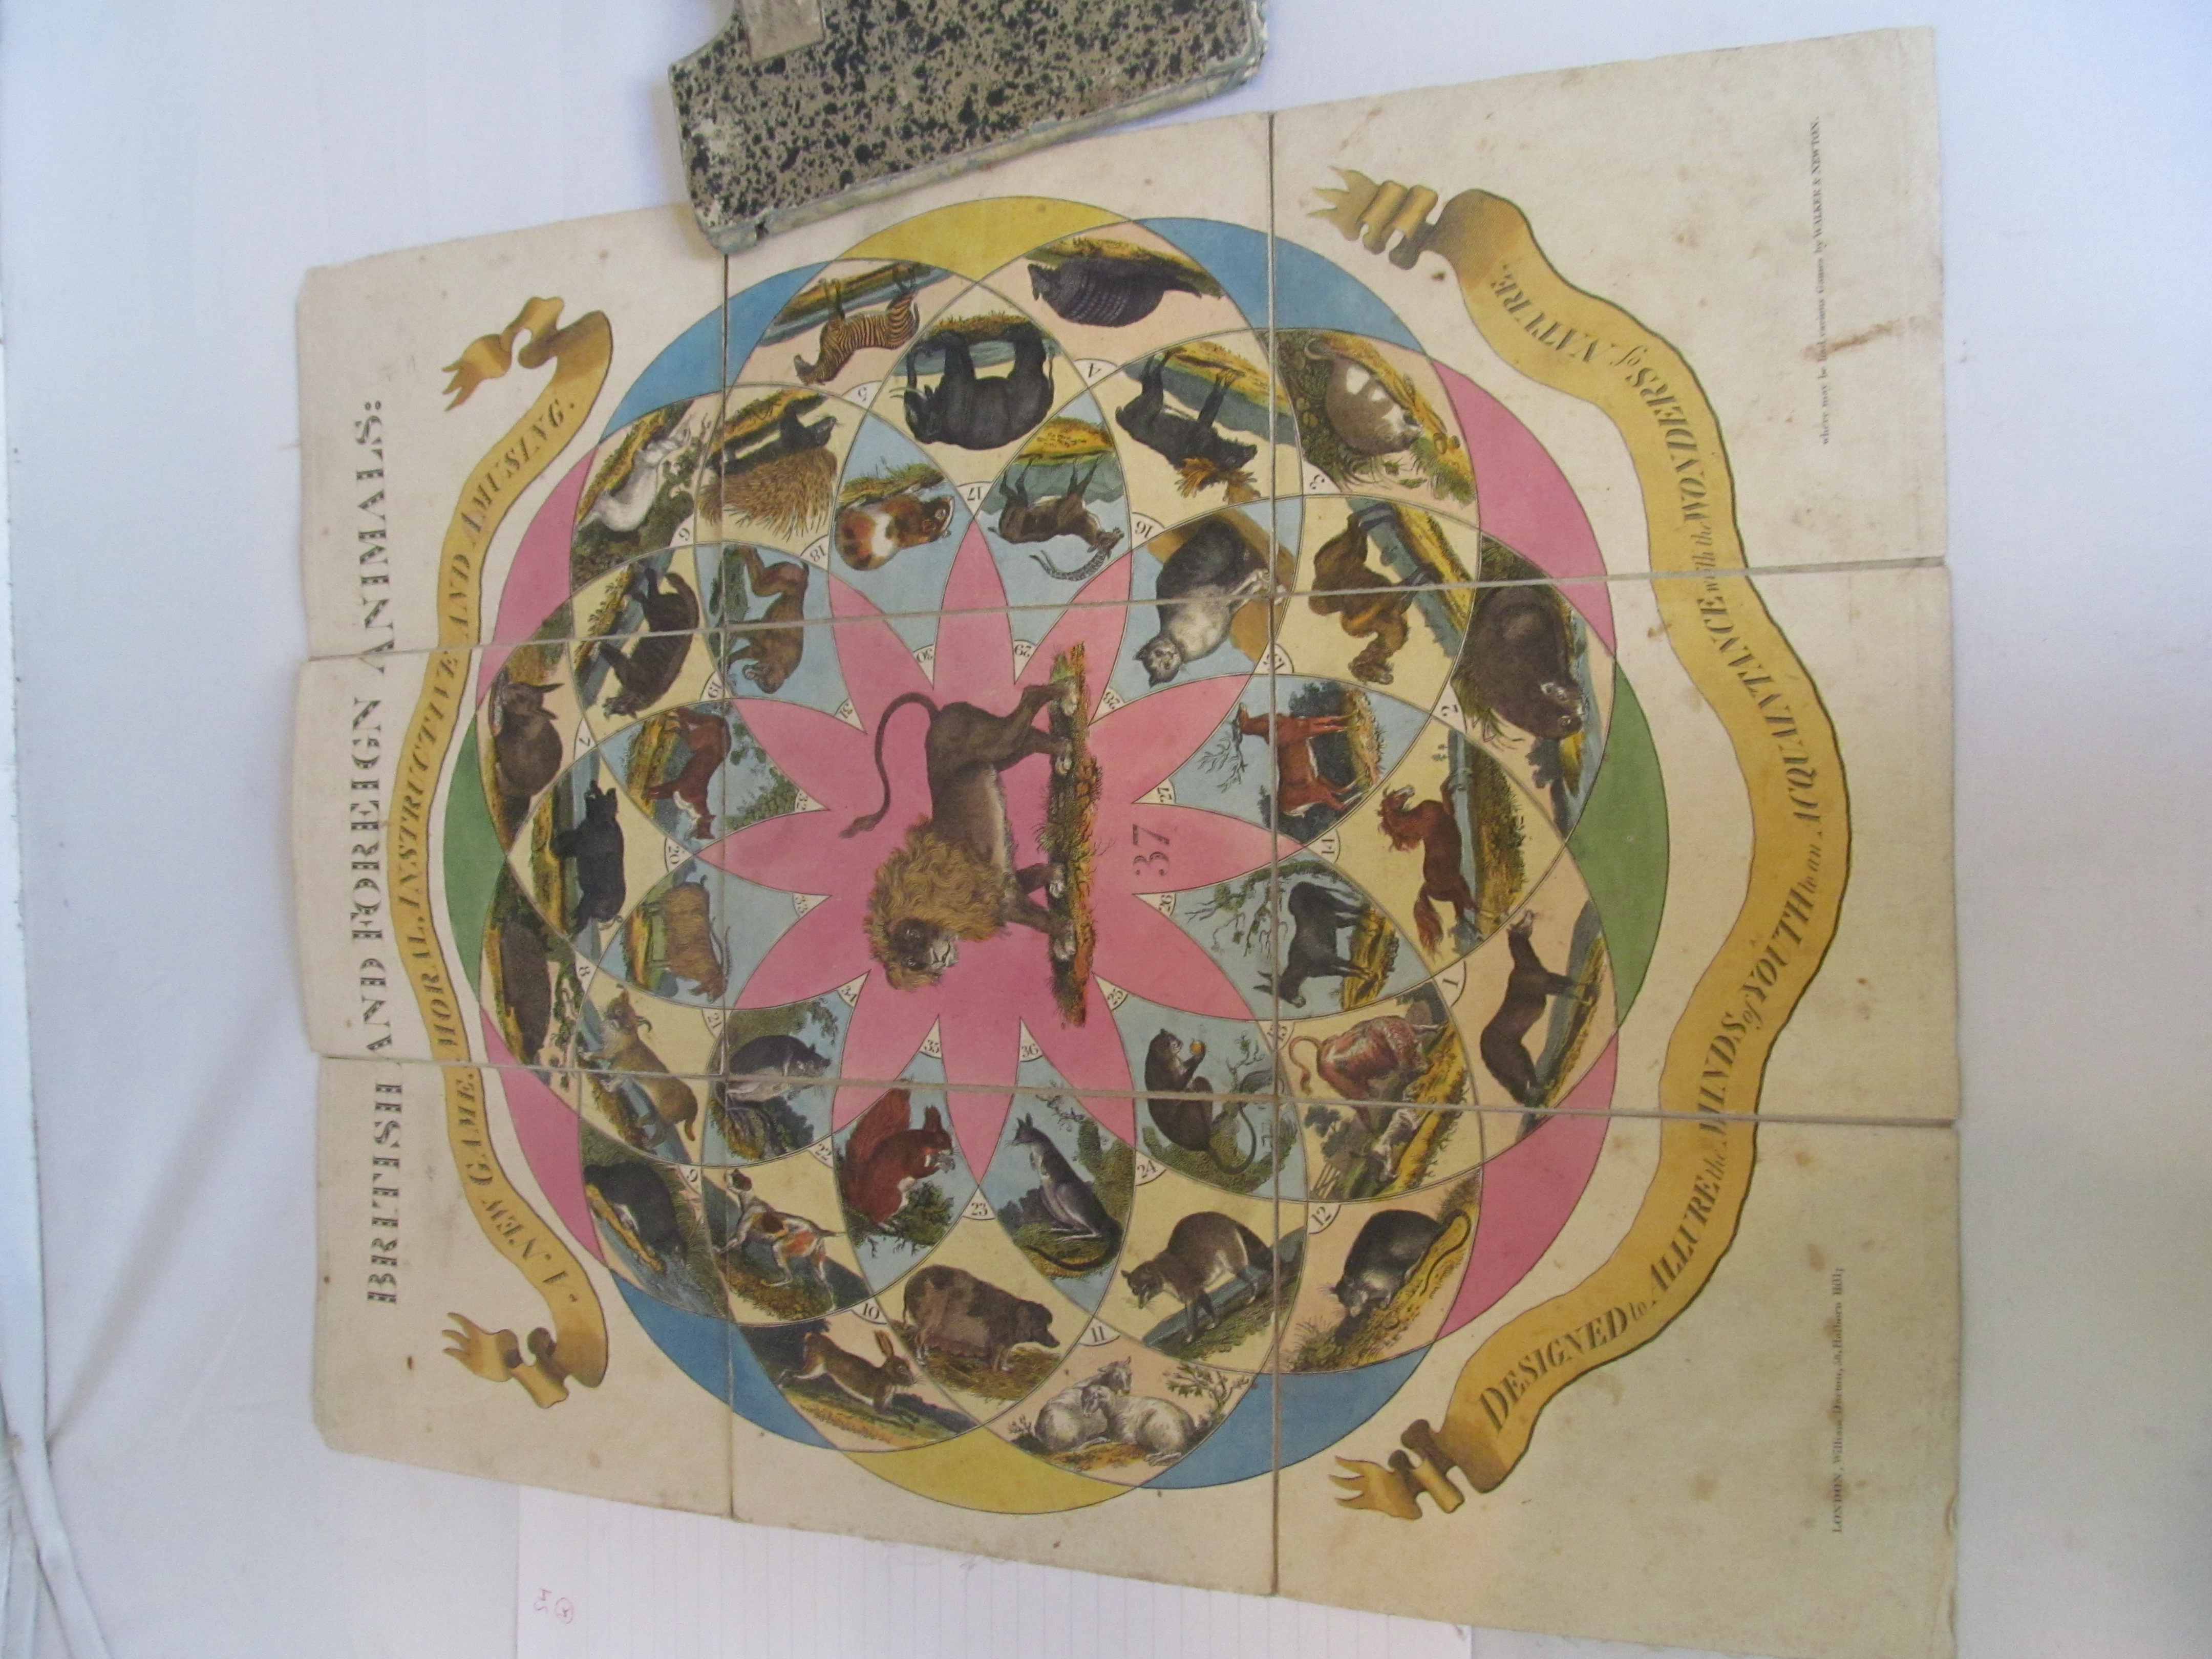 A cloth games board with British and foreign animals, published by William Durton, London - Image 3 of 5